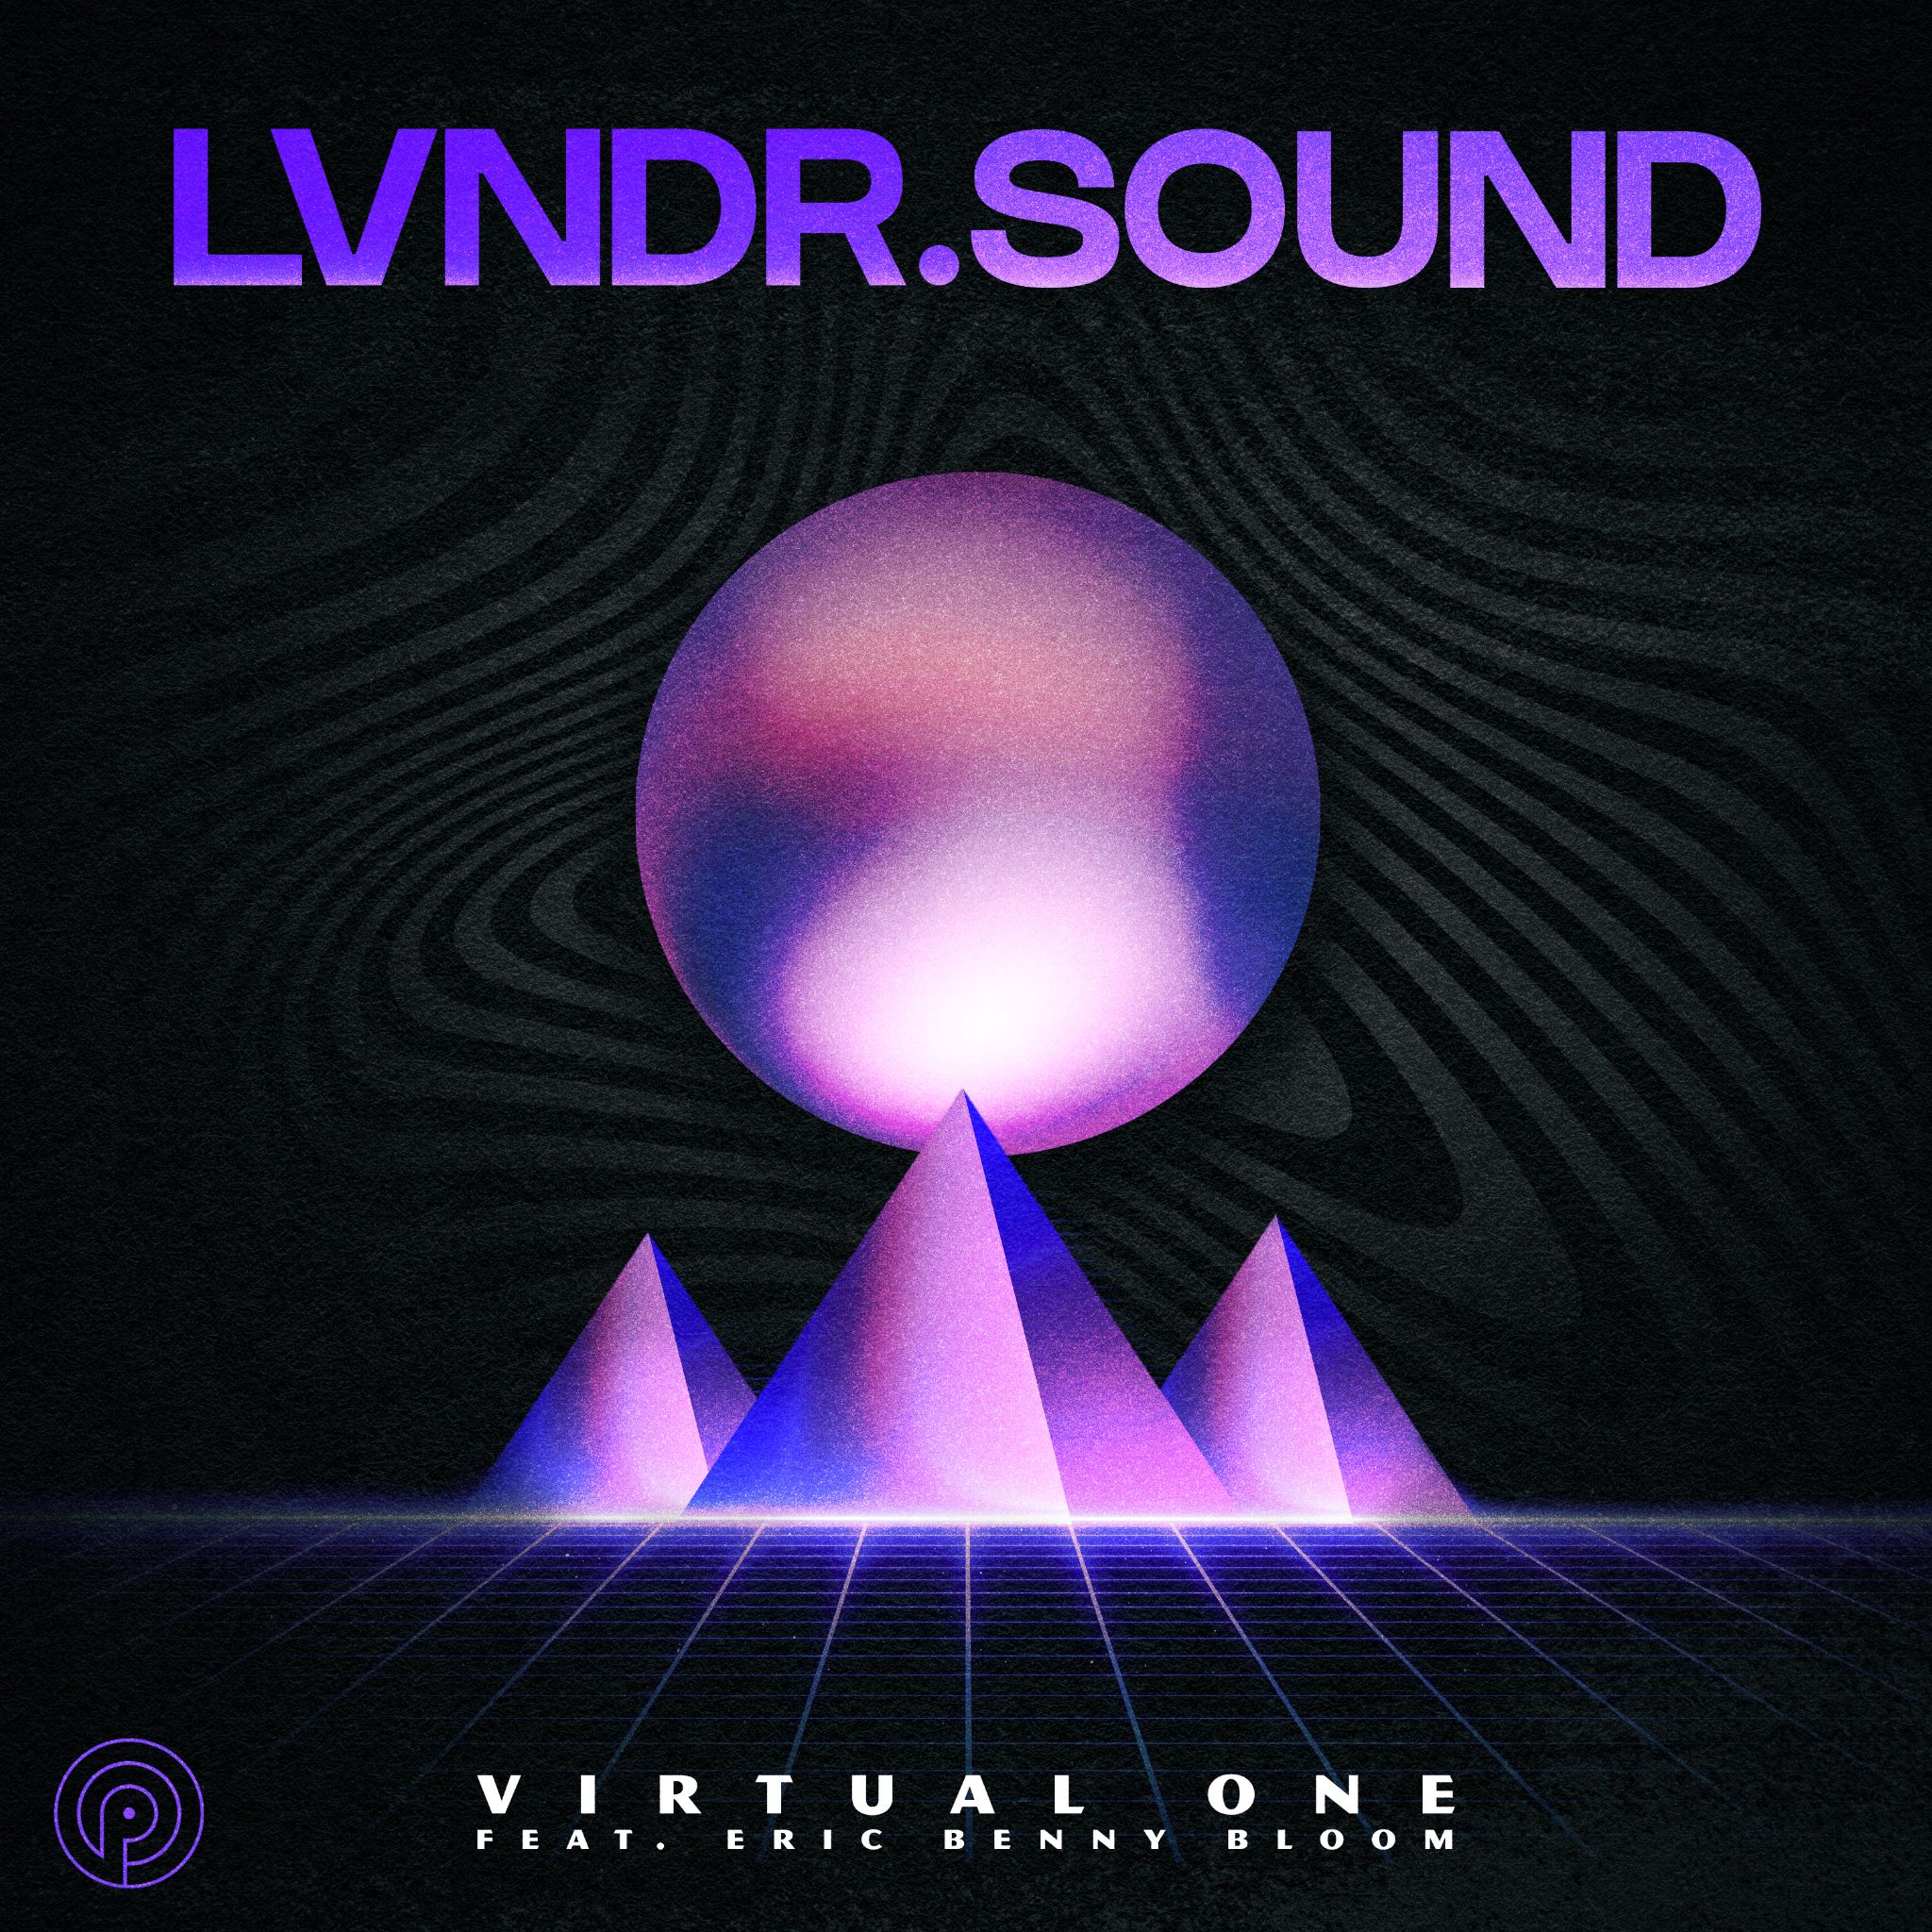 LVNDR.SOUND enlists Eric ‘Benny’ Bloom of Lettuce on groovy new single “Virtual One”